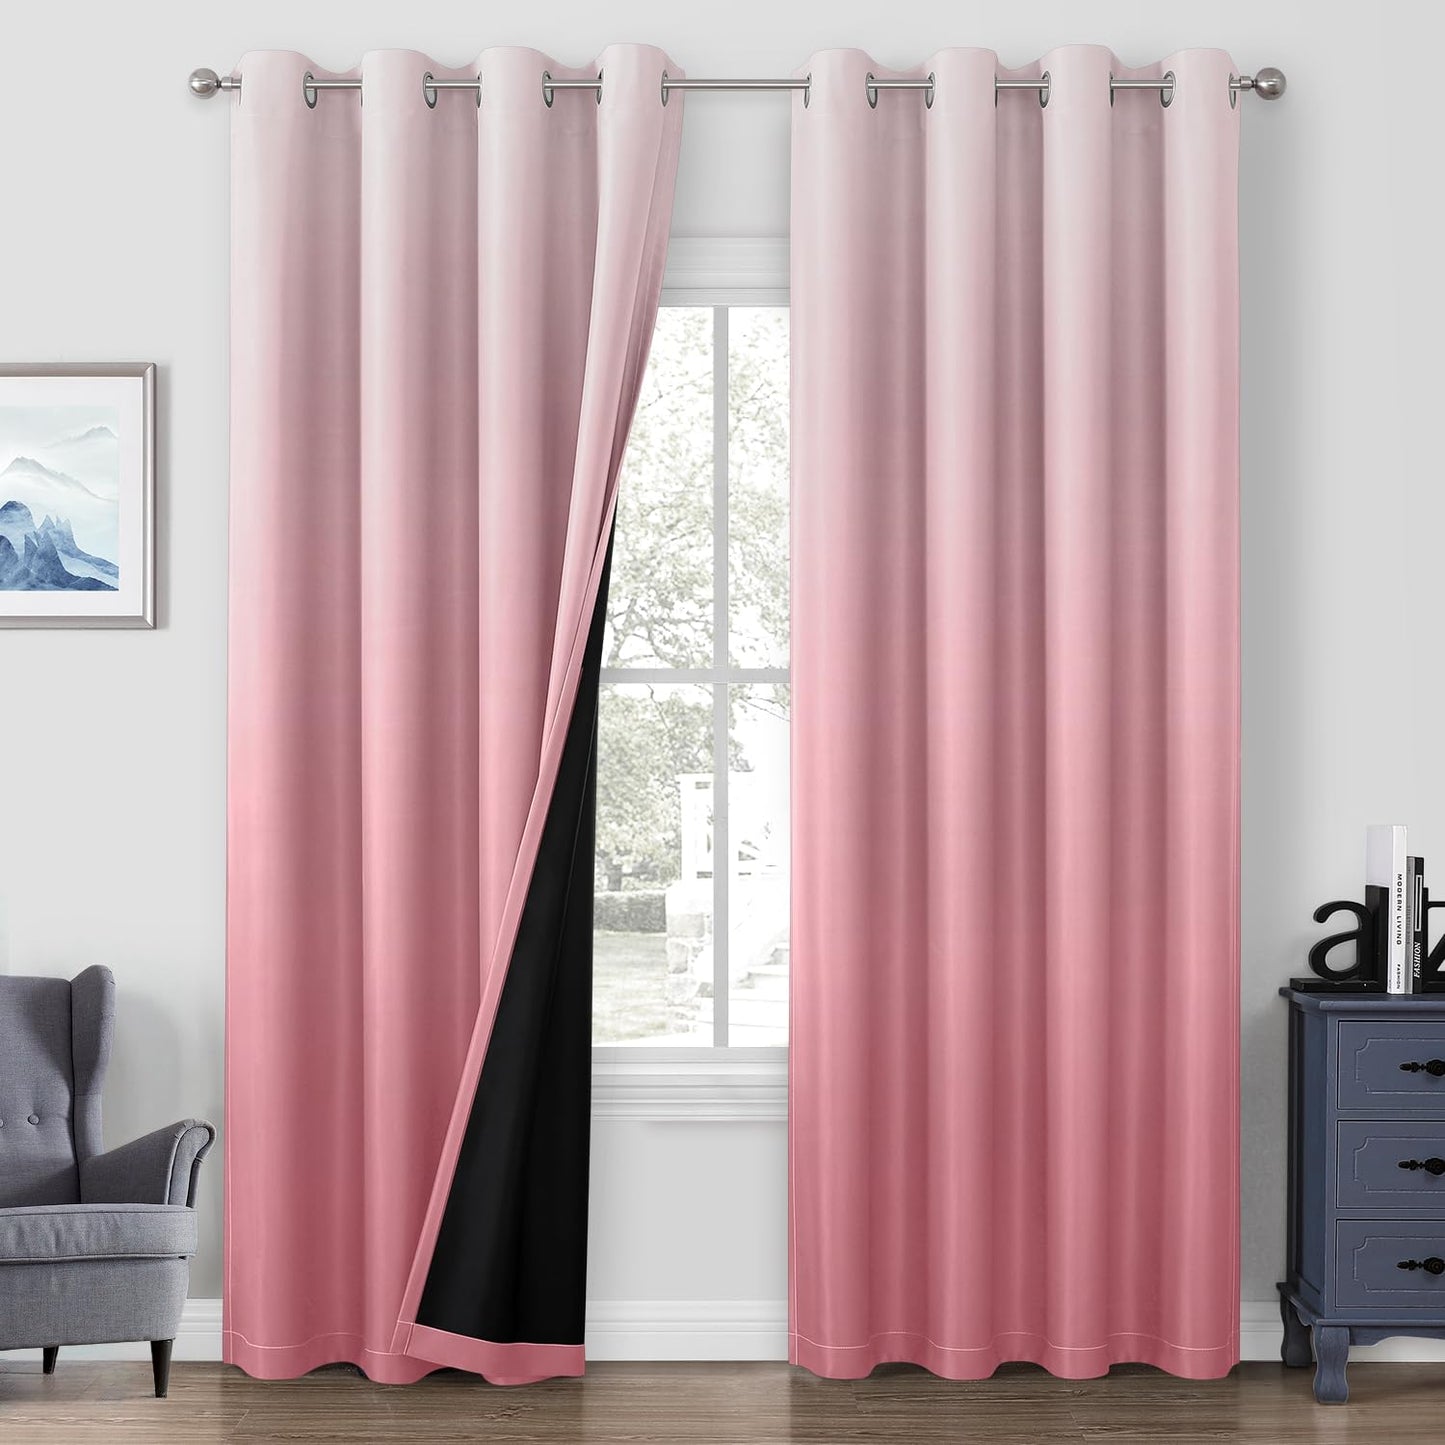 HOMEIDEAS 100% Black Ombre Blackout Curtains for Bedroom, Room Darkening Curtains 52 X 84 Inches Long Grommet Gradient Drapes, Light Blocking Thermal Insulated Curtains for Living Room, 2 Panels  HOMEIDEAS Pink 2 Panel-52" X 96" 